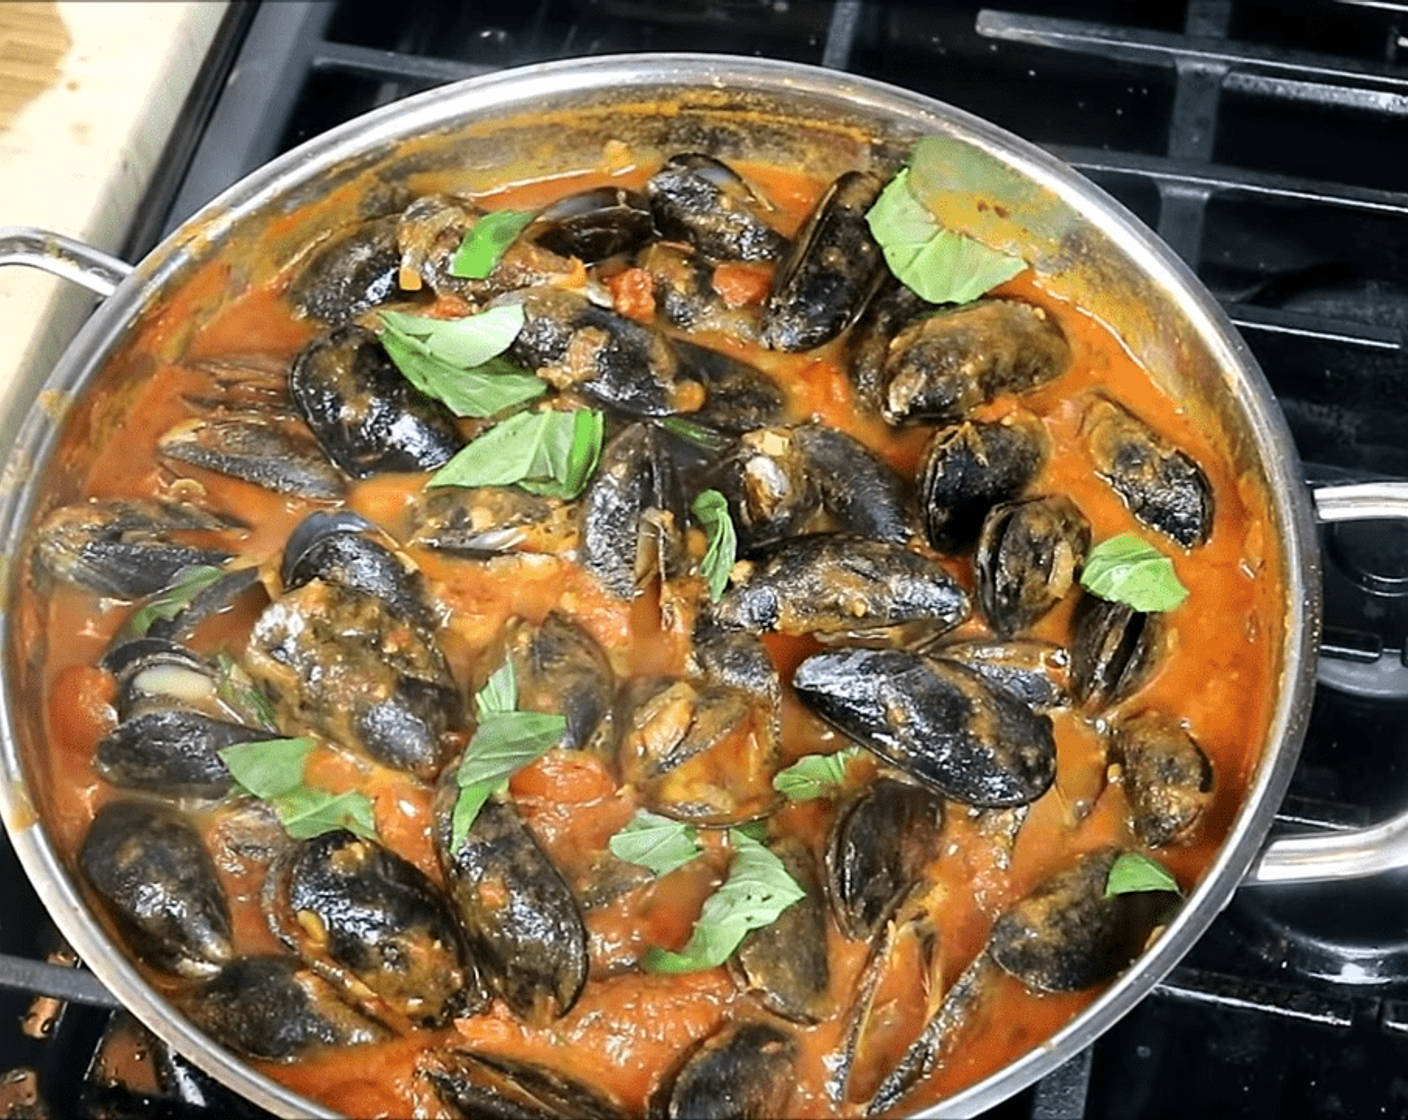 Mussels in a Spicy White Wine Tomato Sauce